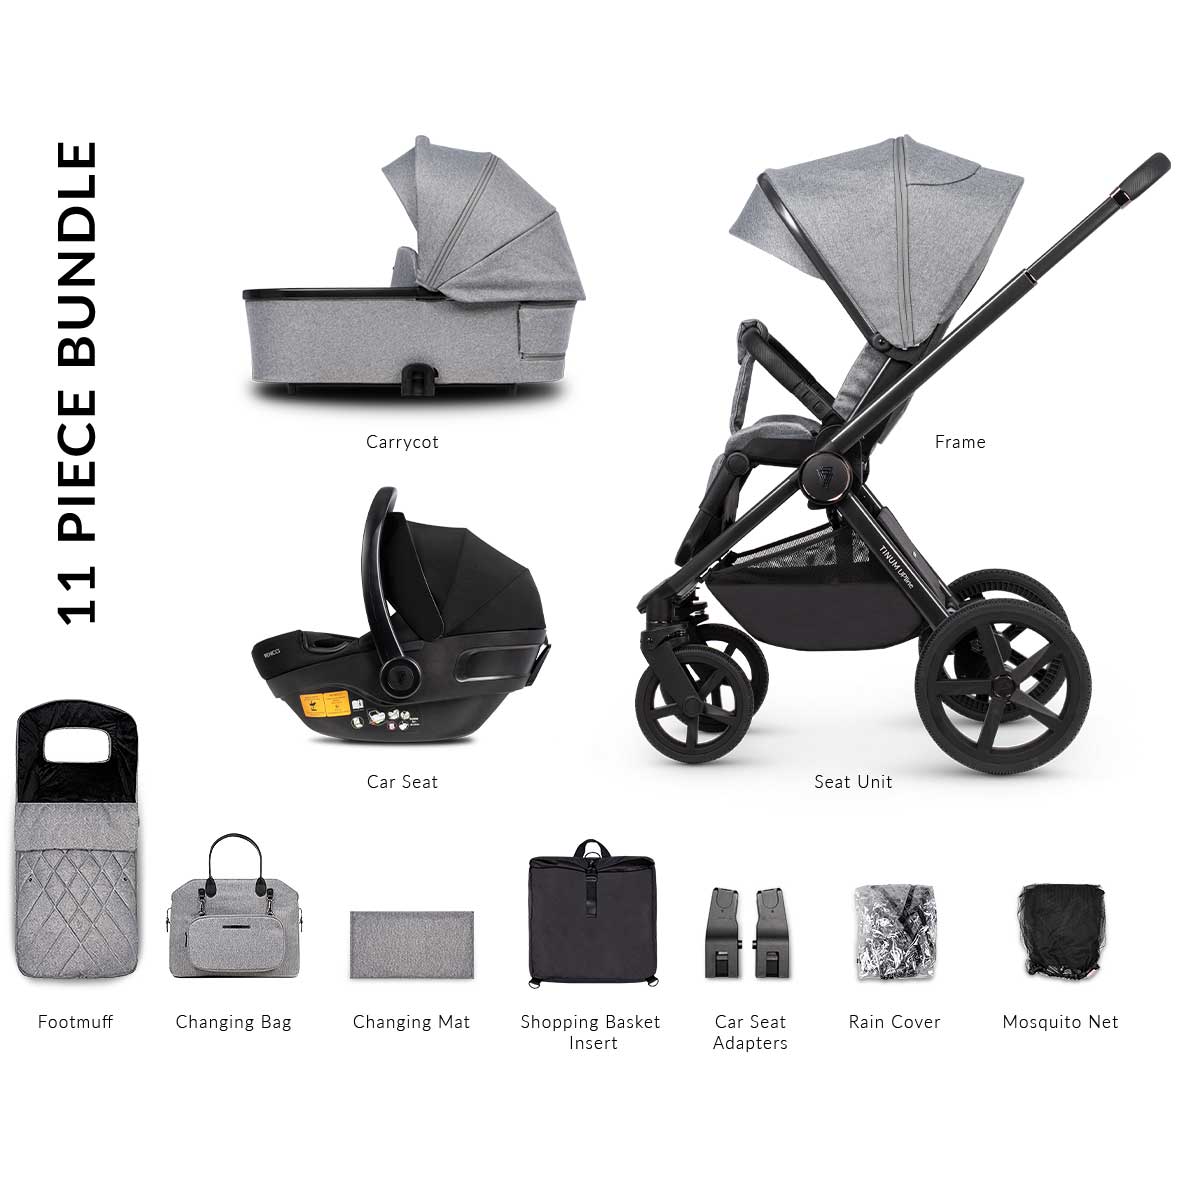 Venicci Tinum Upline Complete Travel System Bundle in Classic Grey Travel Systems 2000210305 5905261331625